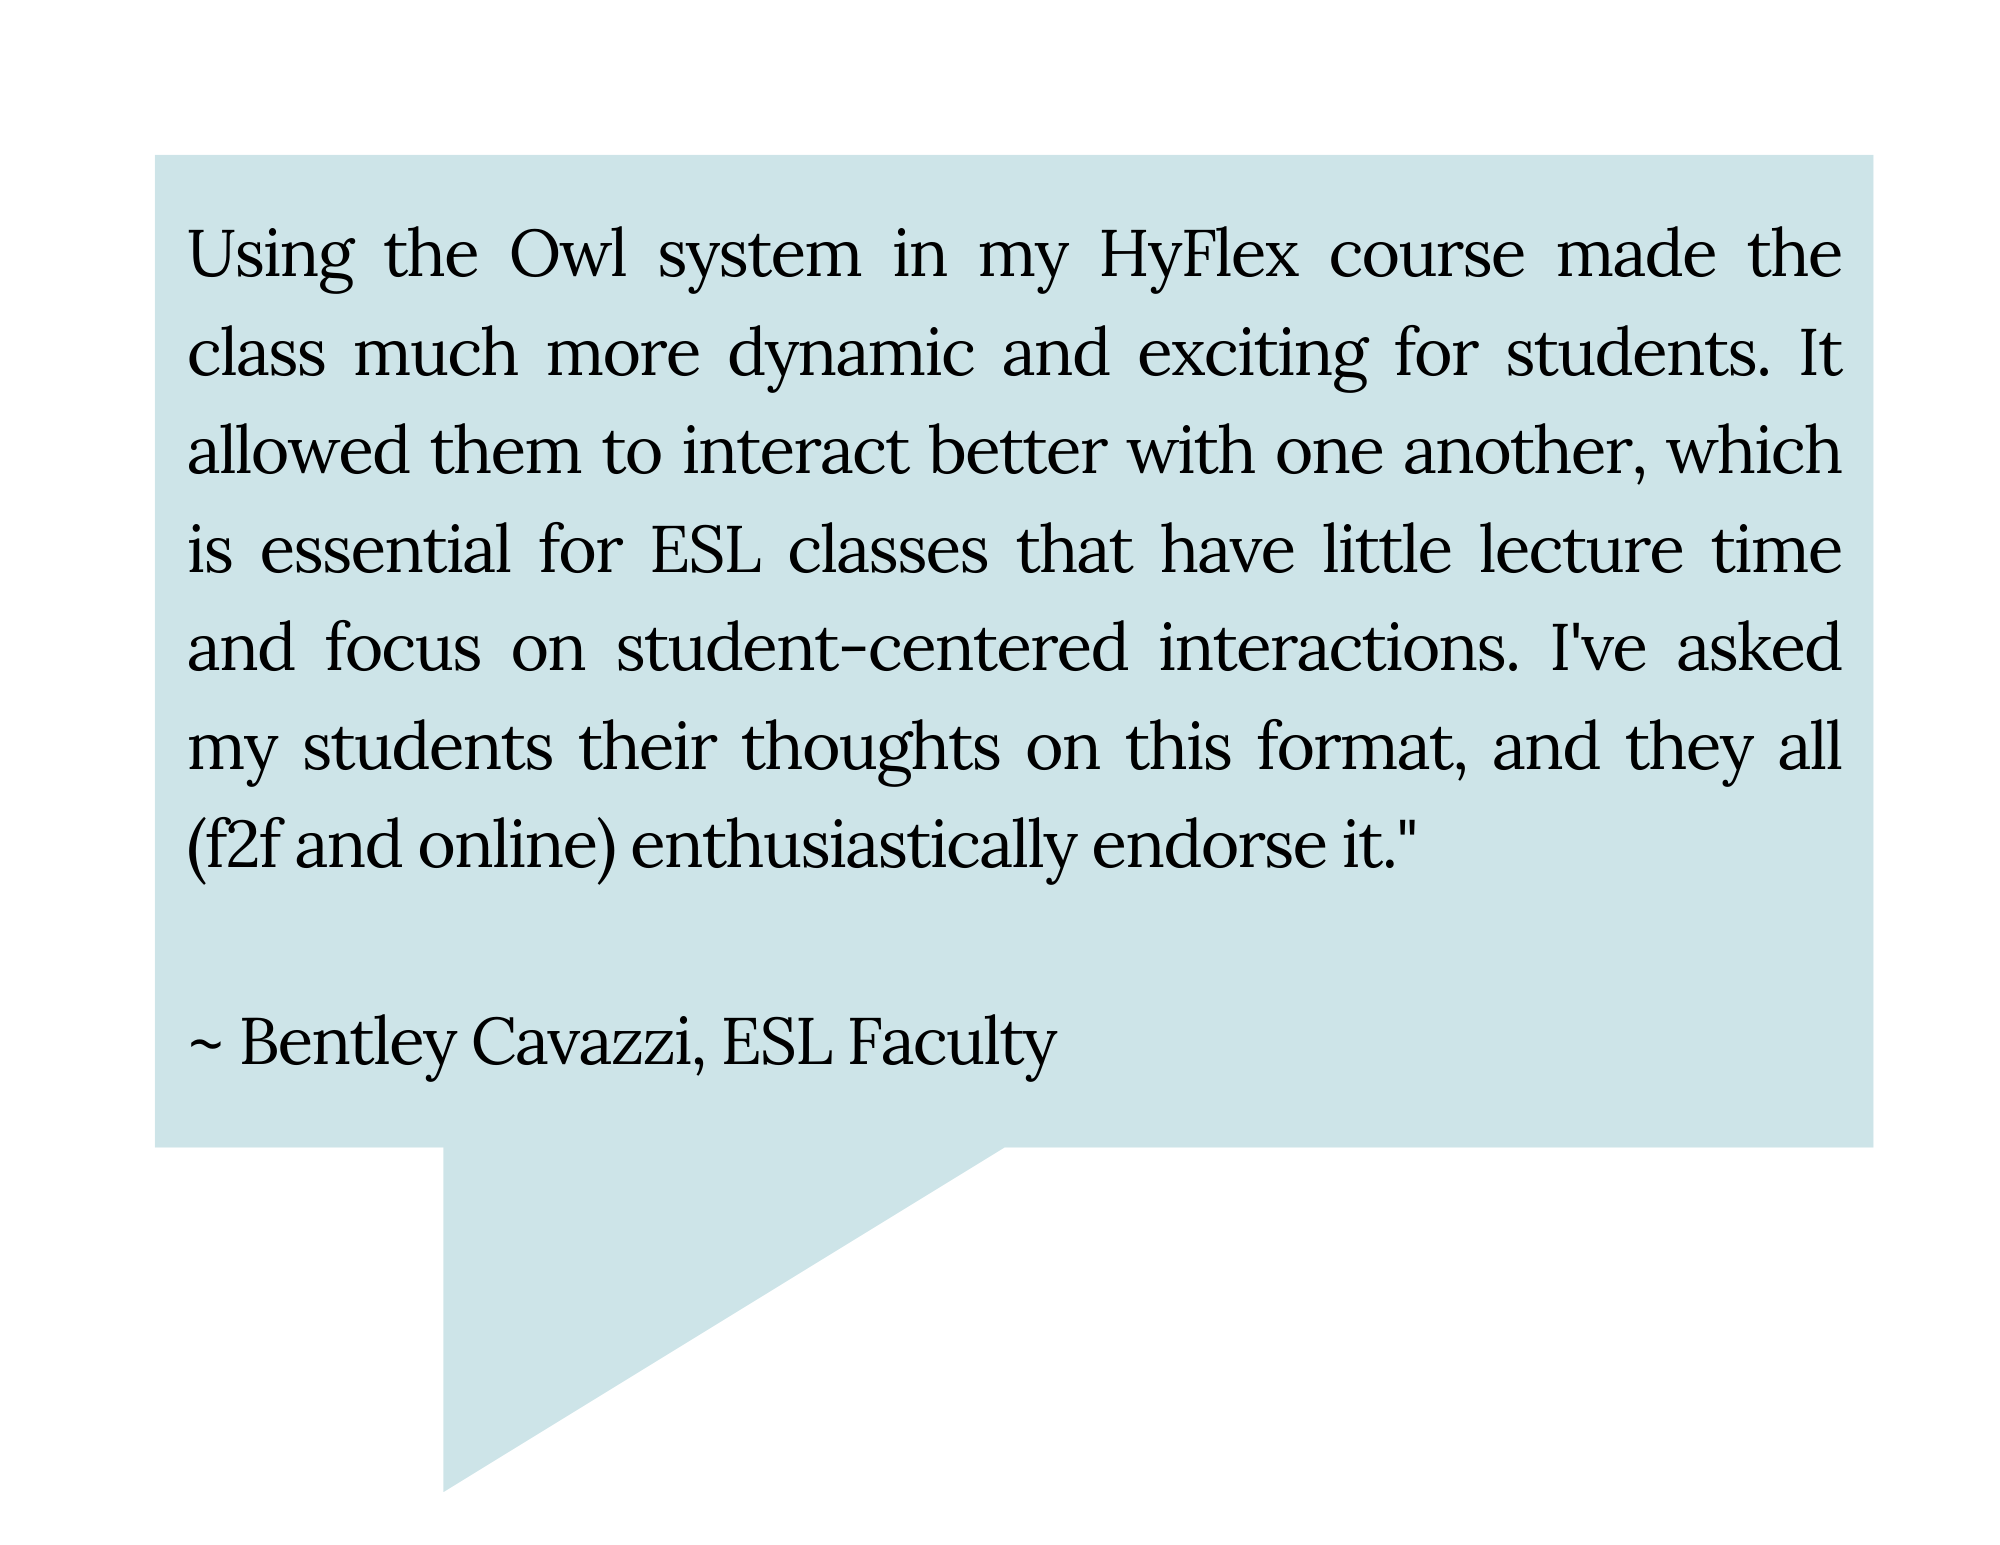 "Using the Owl system in my HyFlex course made the class much more dynamic and exciting for students. It allowed them to interact better with one another, which is essential for ESL classes that have little lecture time and focus on student-centered interactions. I've asked my students their thoughts on this format, and they all (f2f and online) enthusiastically endorse it." Bentley Cavazzi, ESL Faculty